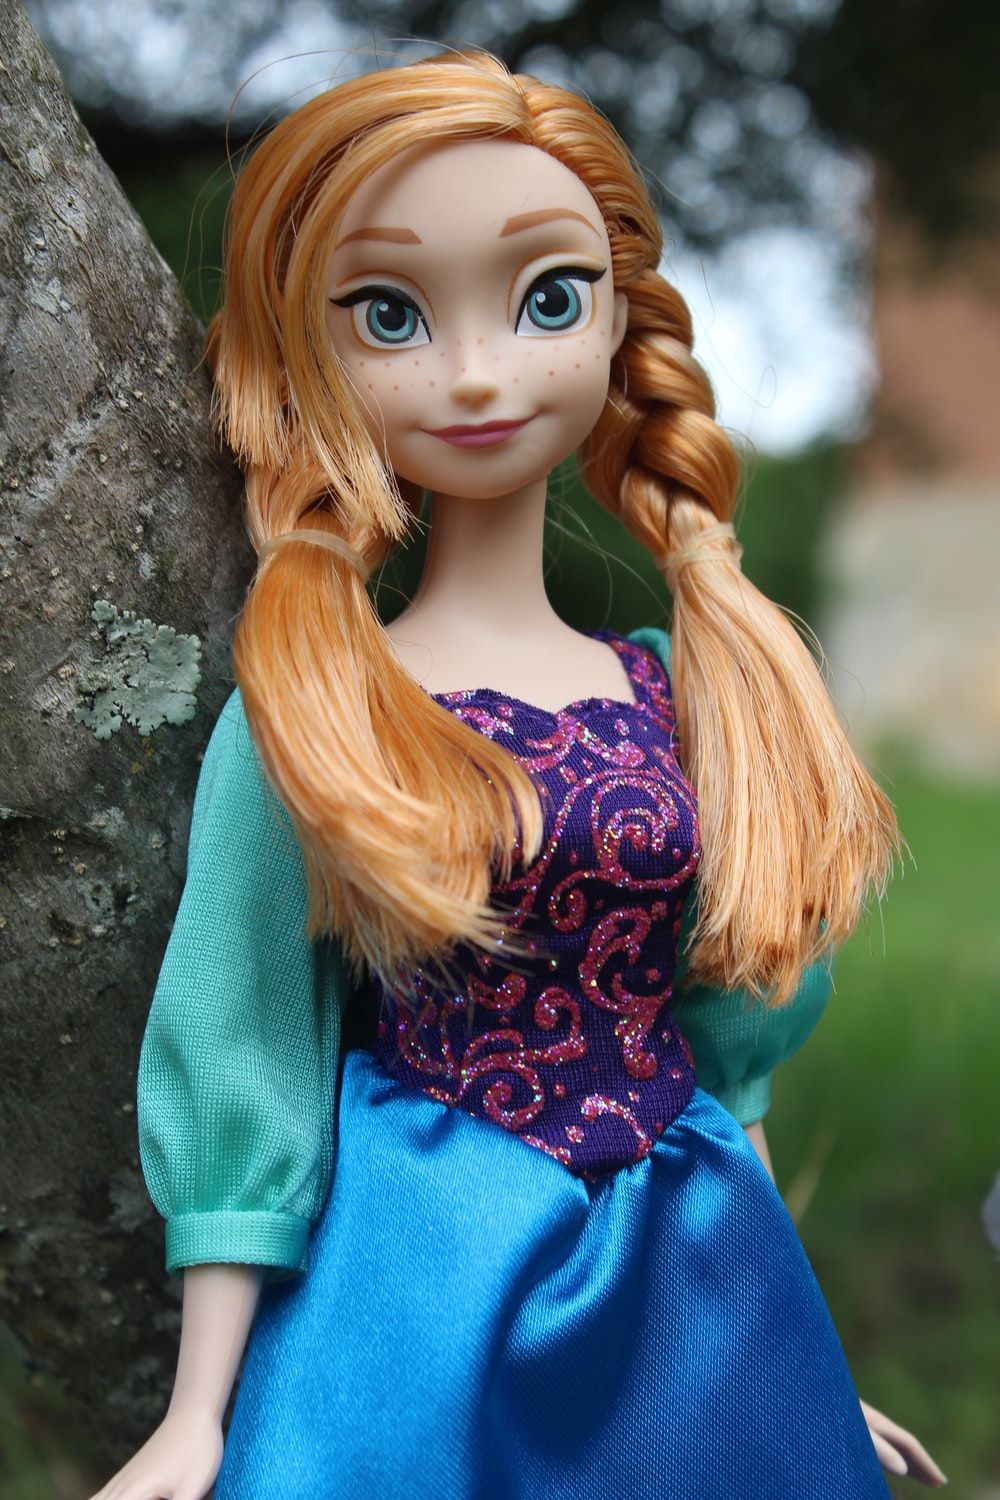 female doll in green dress laying on grass field photo